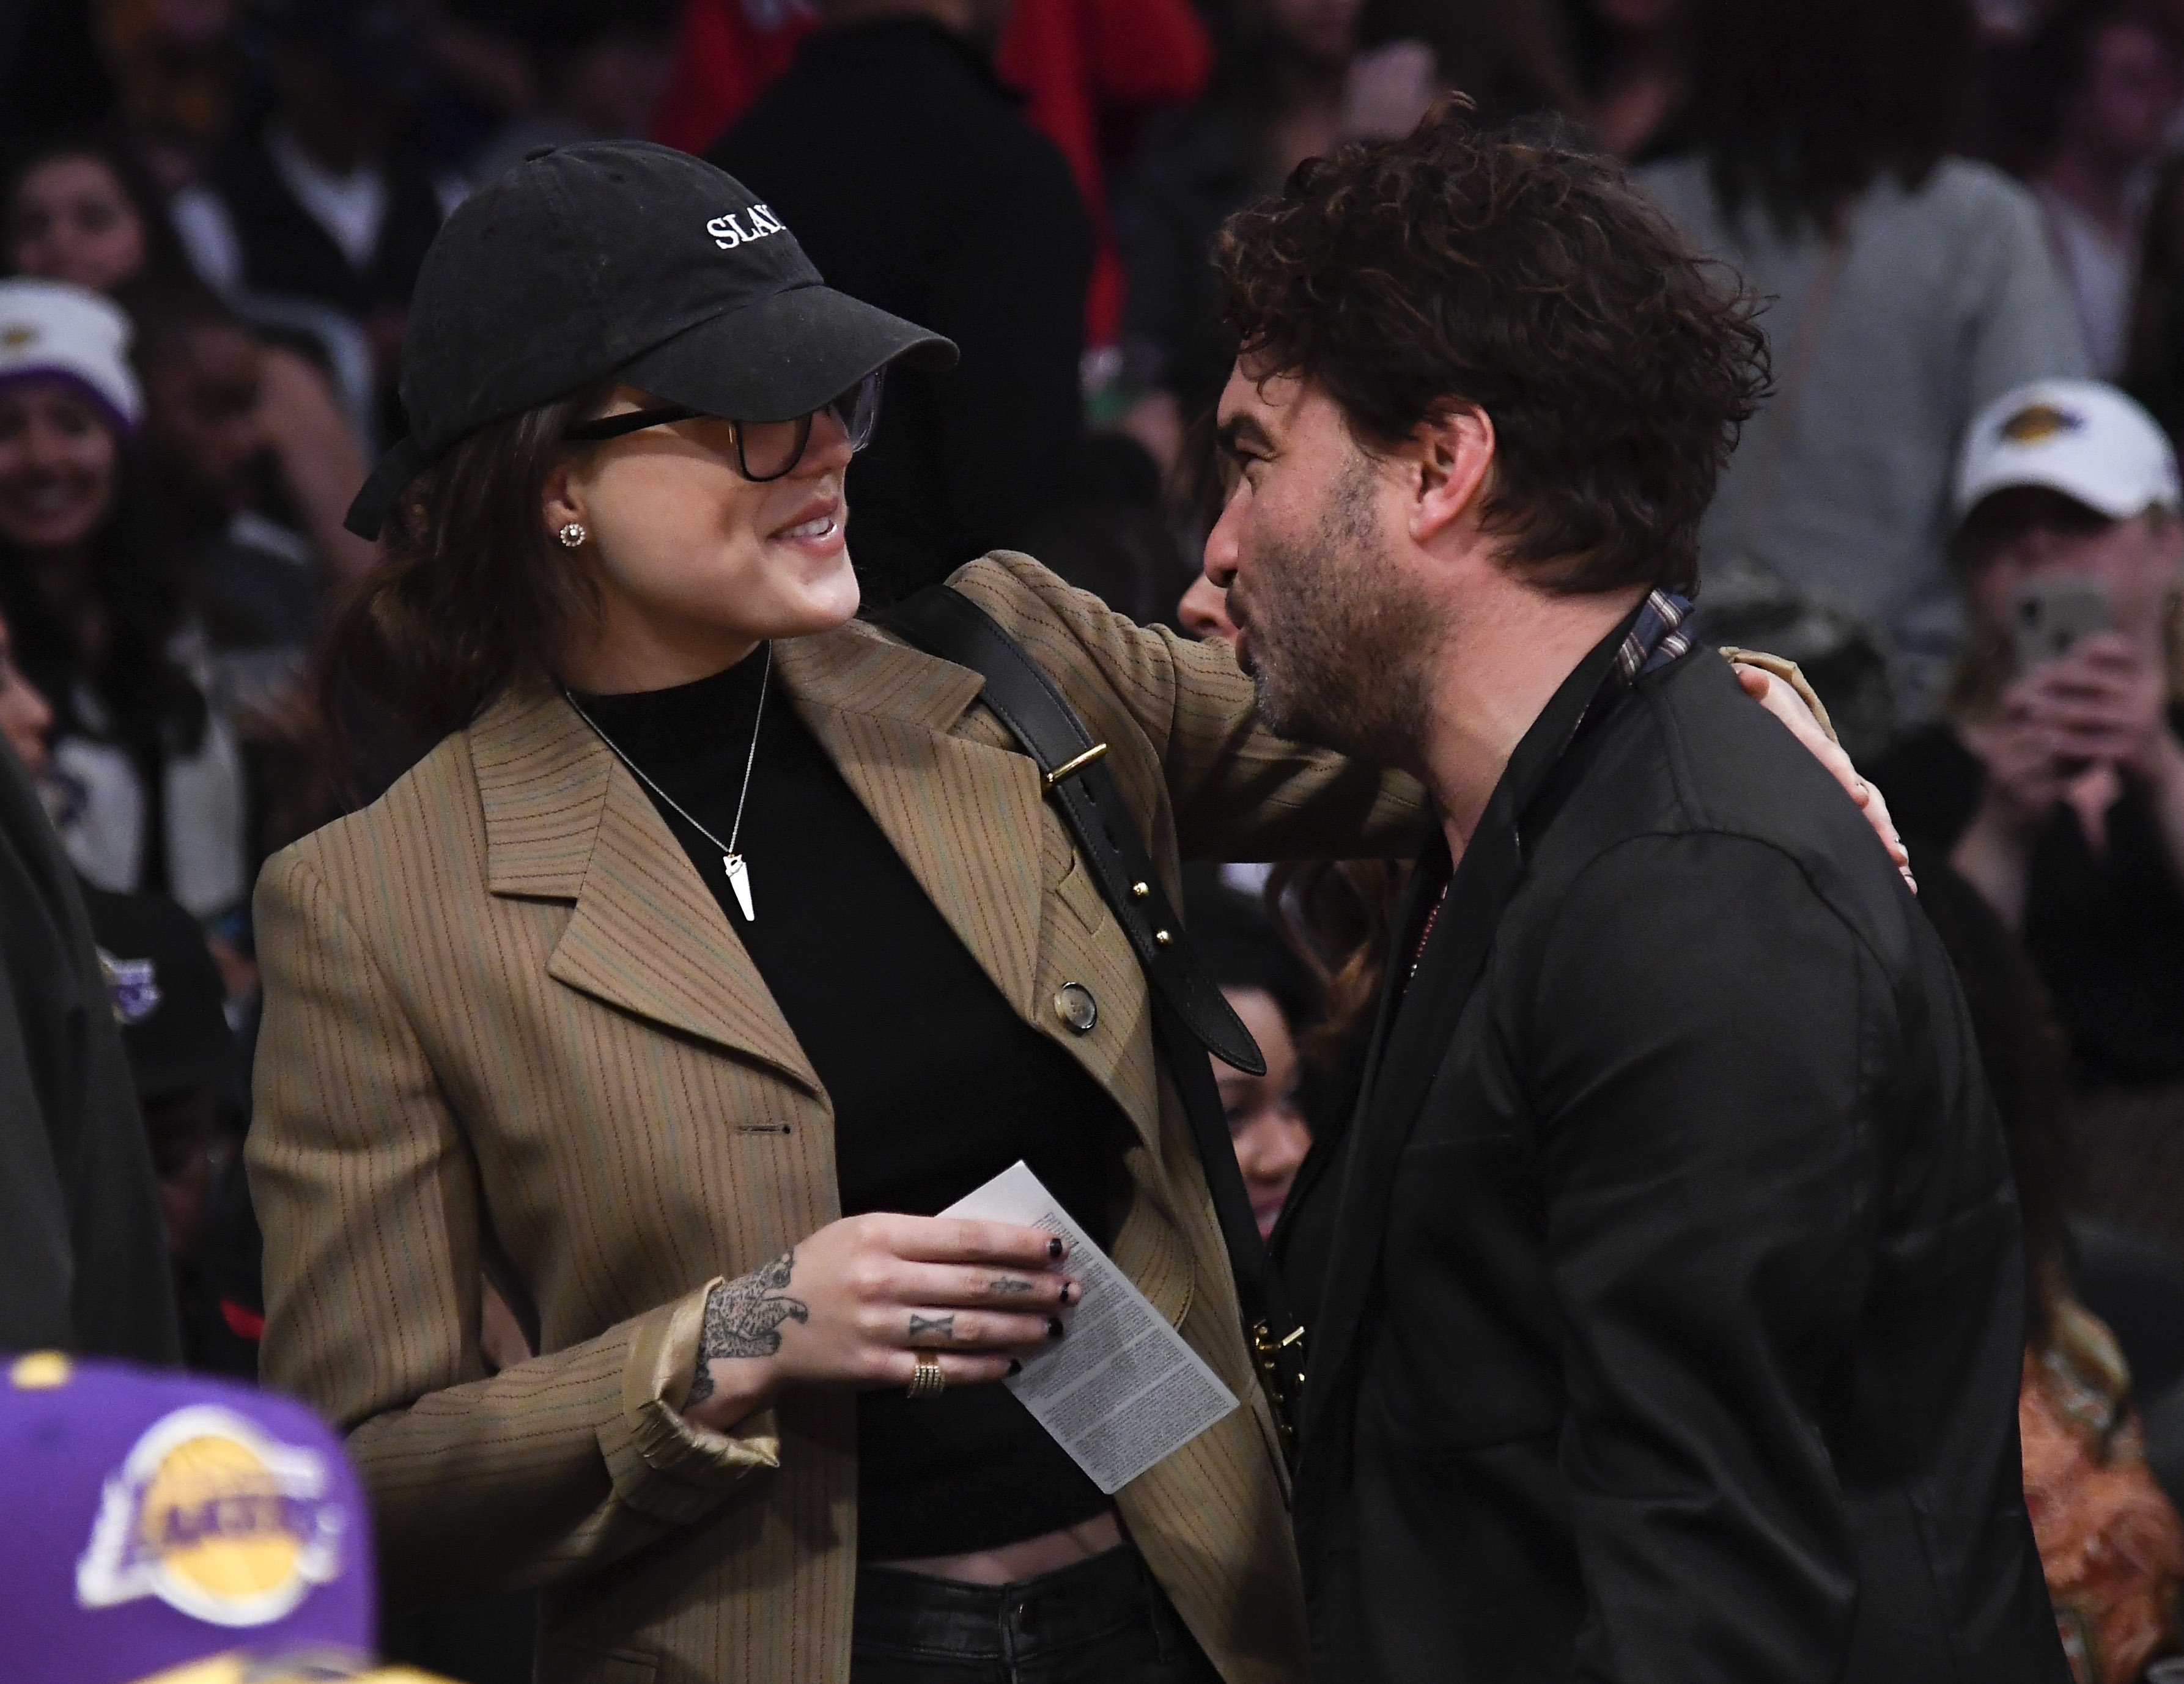 Johnny Galecki and Alaina Meyer attend a basketball game between Charlotte Hornets and Los Angeles Lakers at Staples Center on March 29, 2019 in Los Angeles, California. | Source: Getty Images